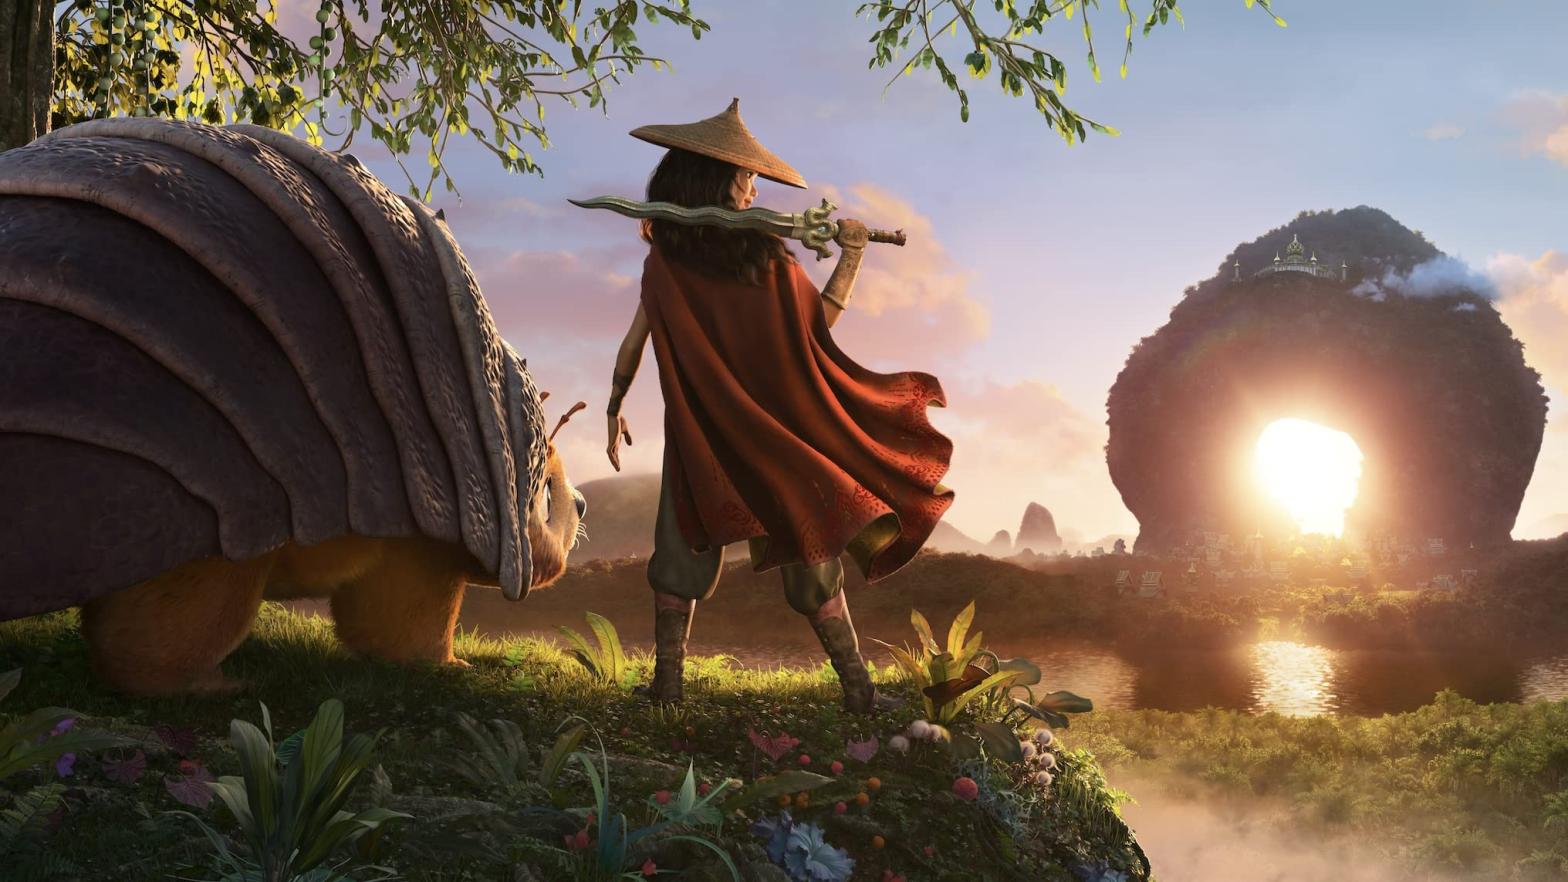 Pictured, left to right: armadillo, Raya, weird rock. (Image: Disney)